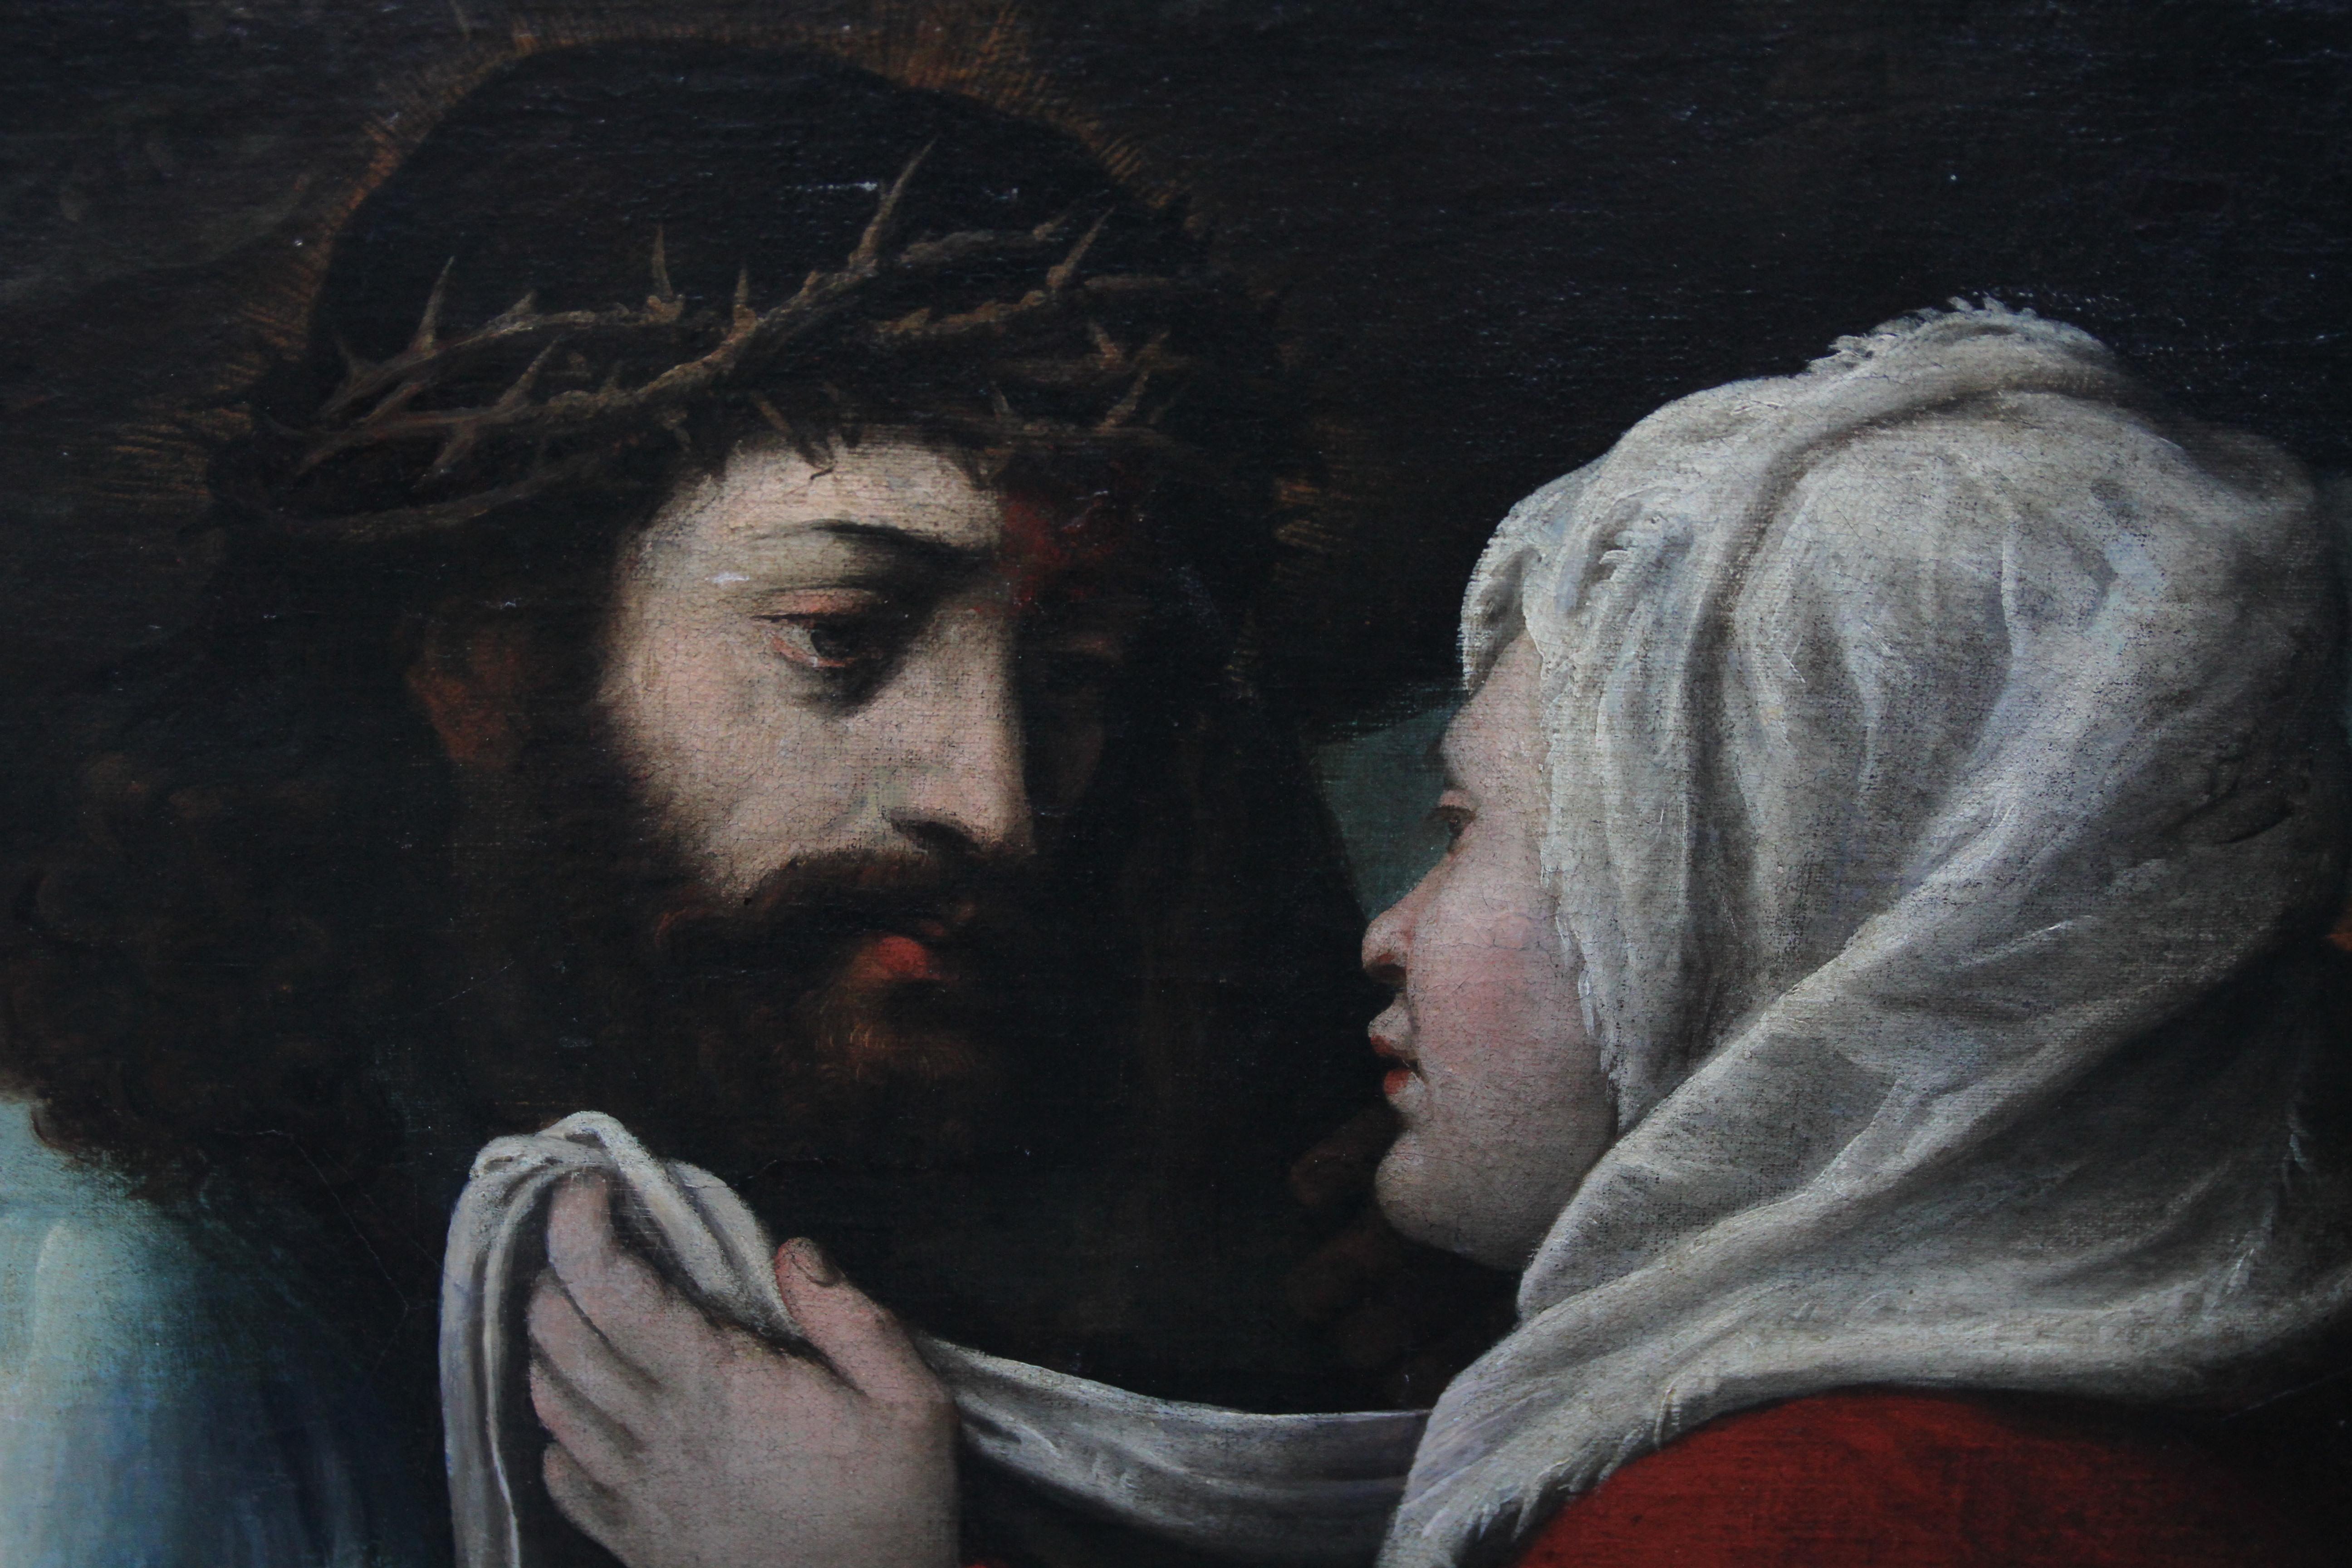 Saint Veronica Wiping Face of Christ - Italian 17thC art religious oil painting - Old Masters Painting by Unknown